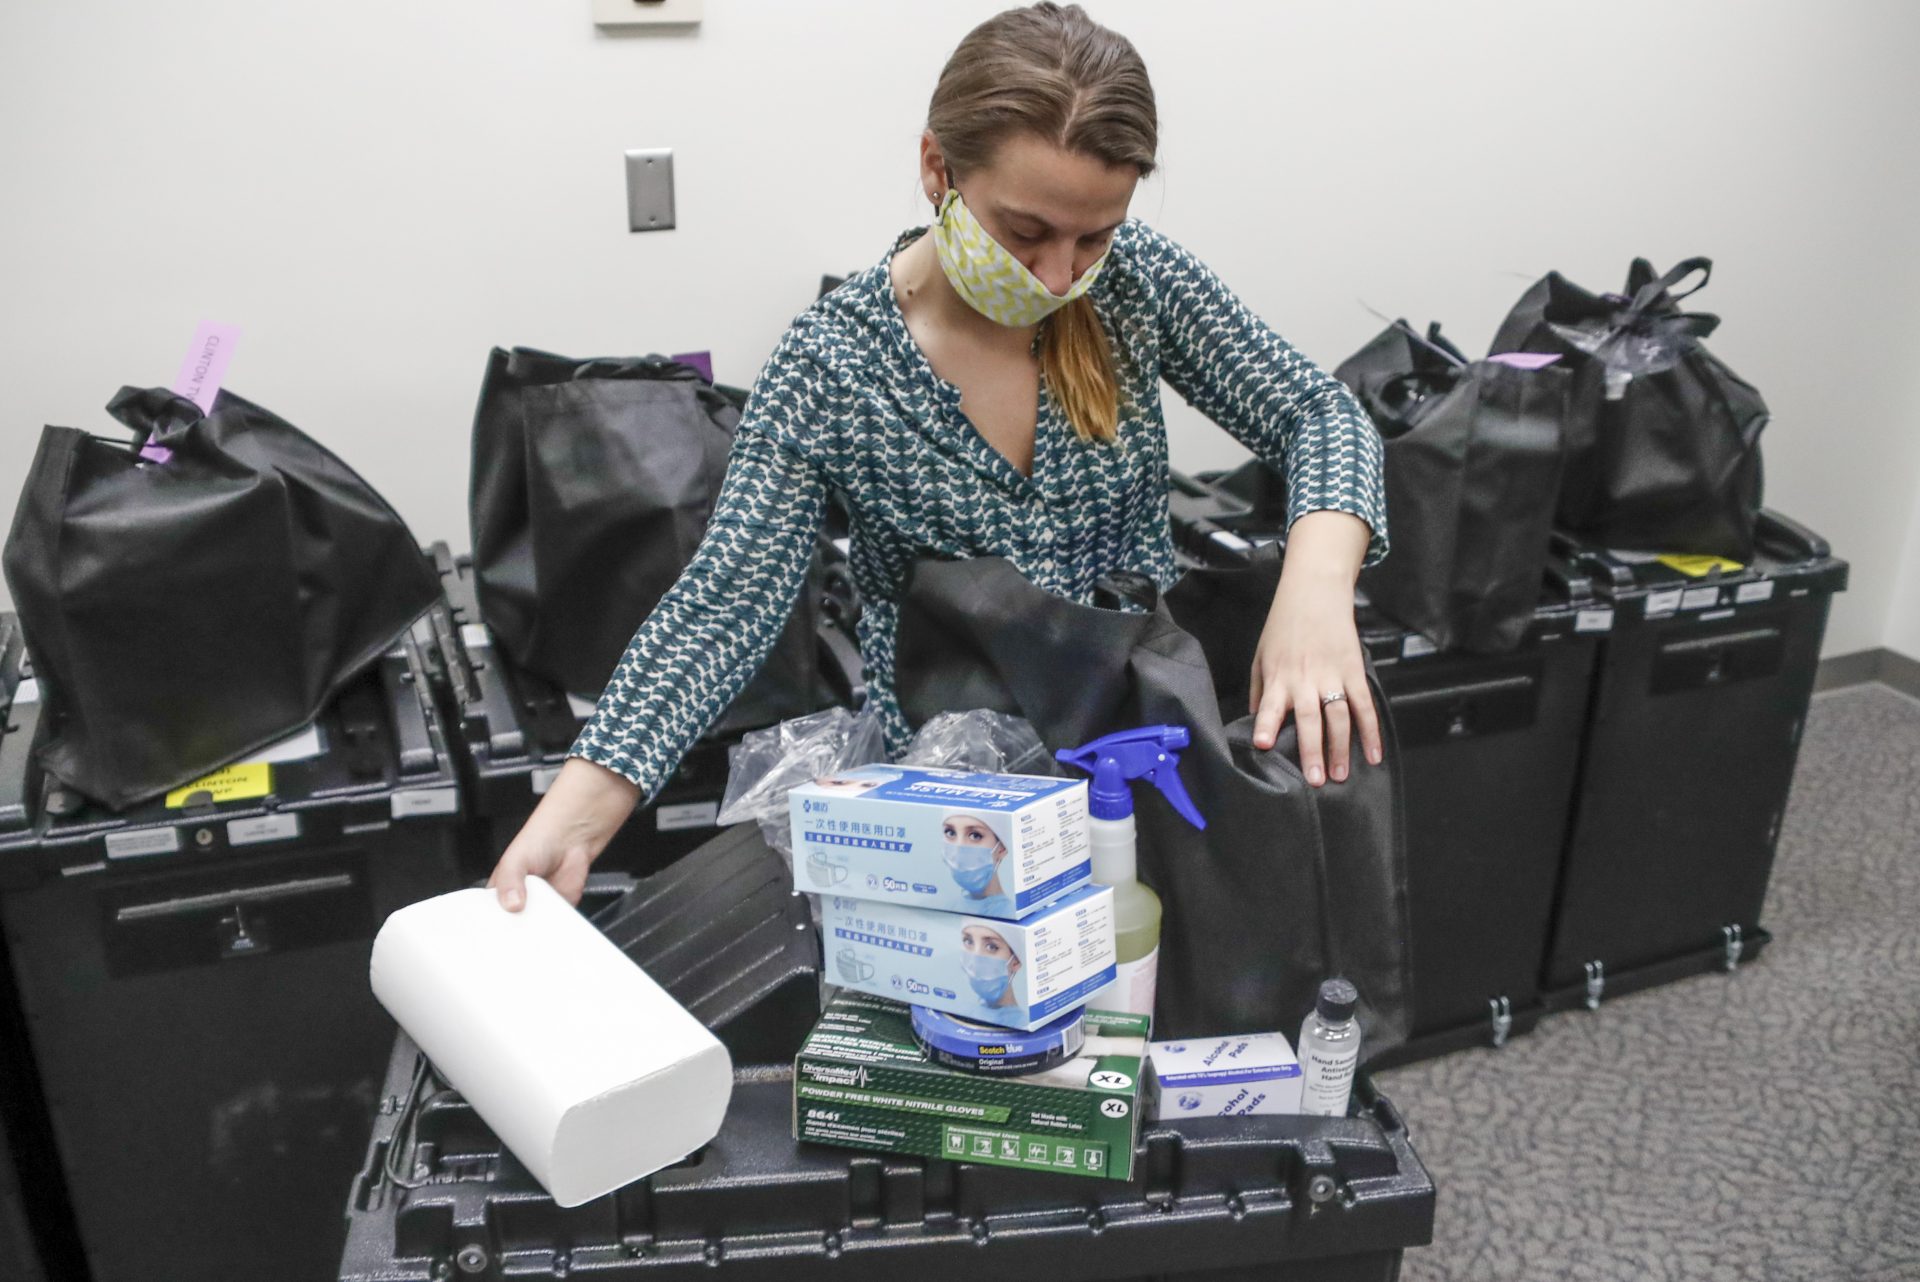 Butler County Bureau of Elections Registrar, Chantell McCurdy packs one of the COVID-19 cleaning and preparedness precinct kits with equipment as protective masks, gloves, hand sanitizers, wipes and sprays for sanitizing, for poll workers for Pennsylvania's June 2nd Primary election before they are sent out from the offices Thursday, May 28, 2020, in Butler, Pa.